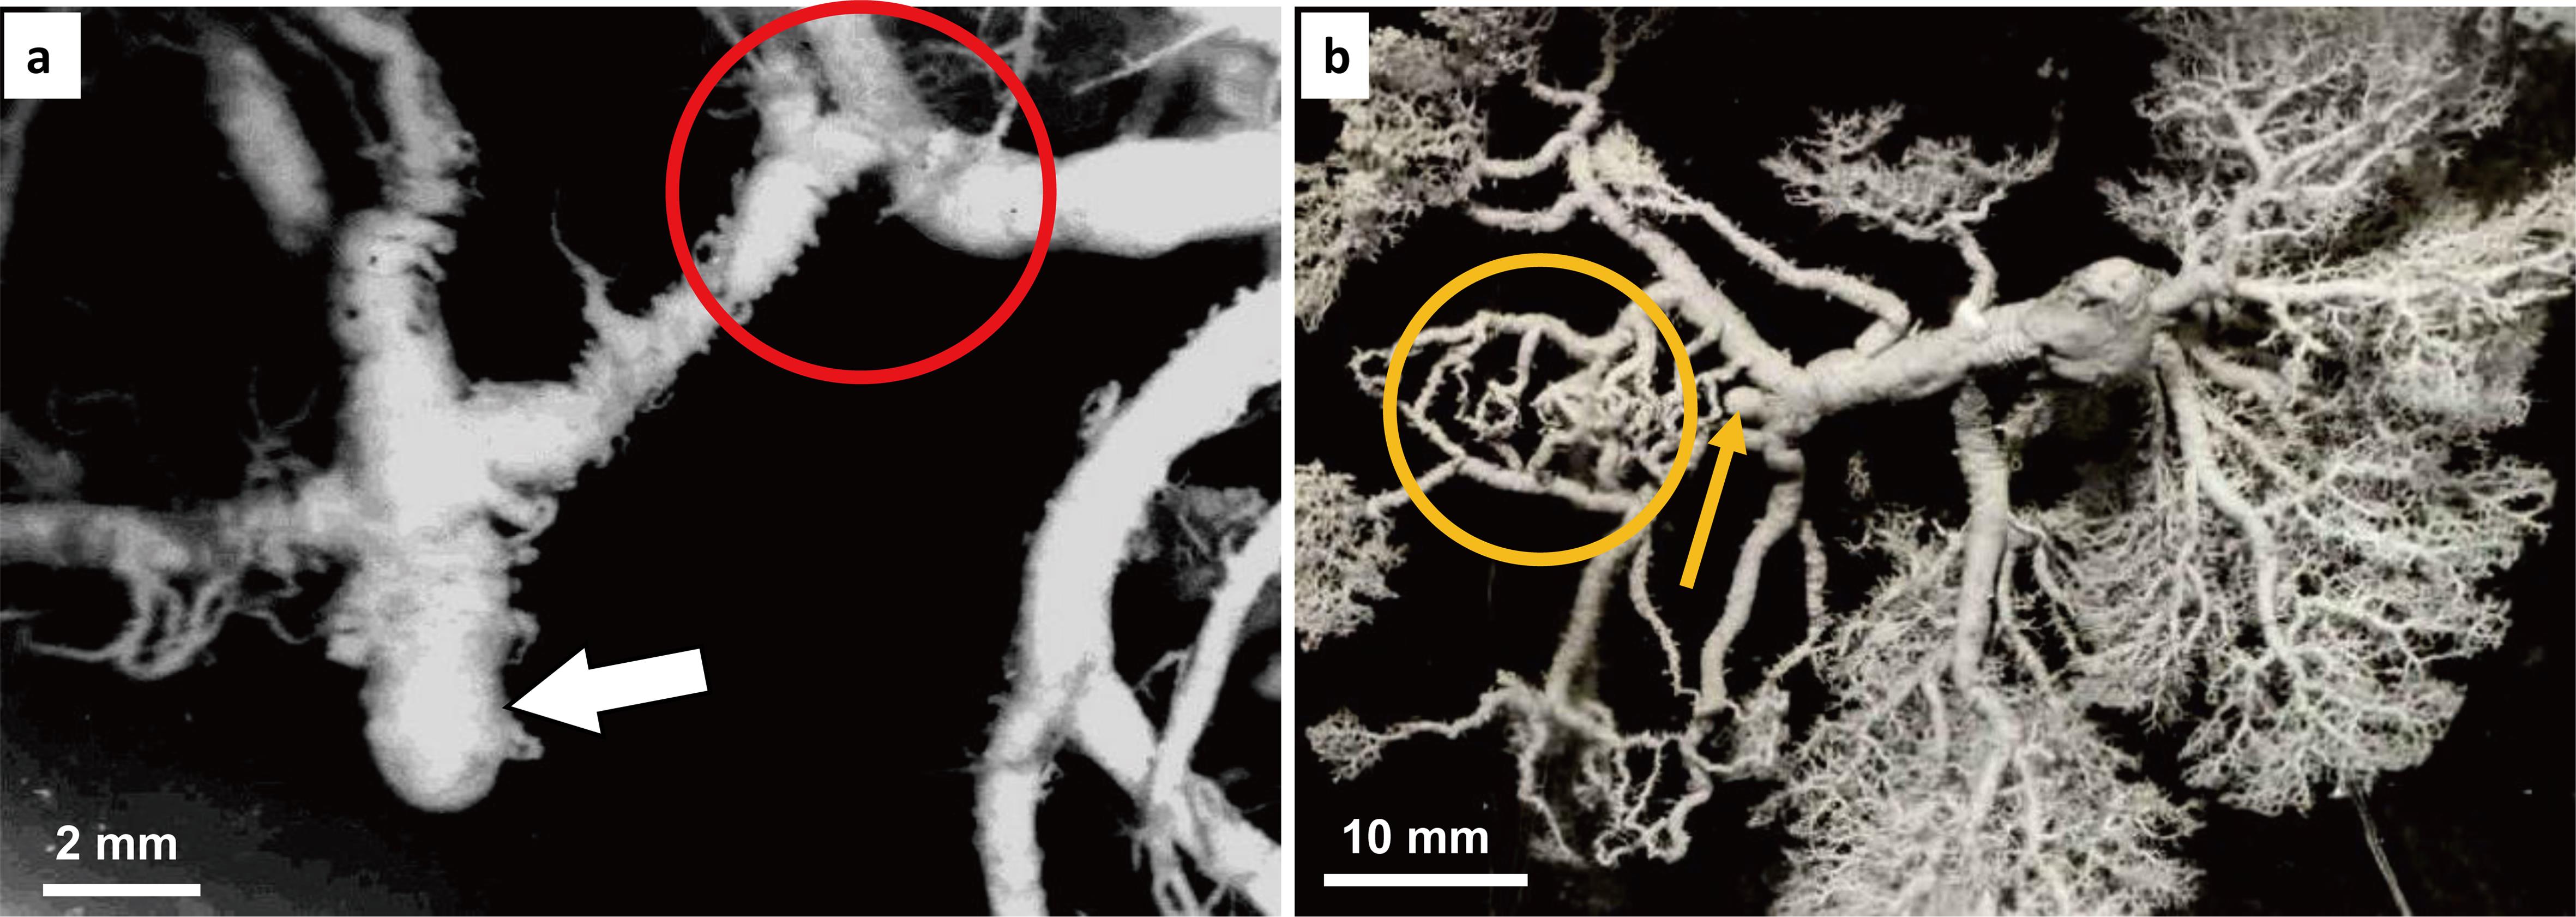 Corrosion casts of biliary (a) and portal vein (b) branches in dogs.